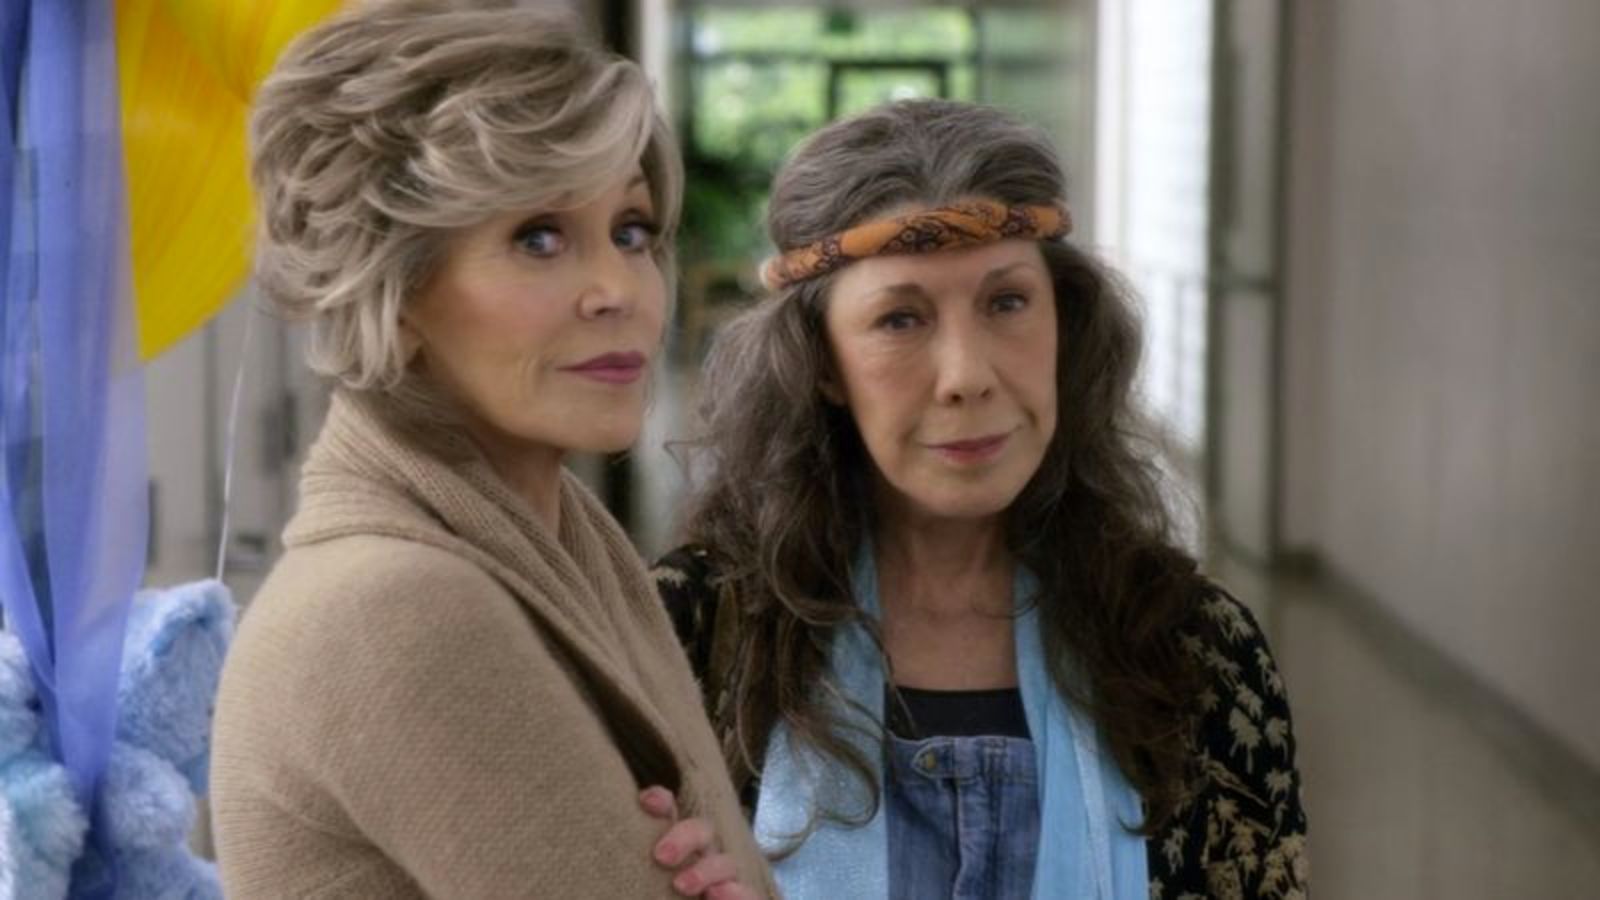 WASP No More Jane Fonda as Grace and Lily Tomlin as Frankie in Grace and Frankie